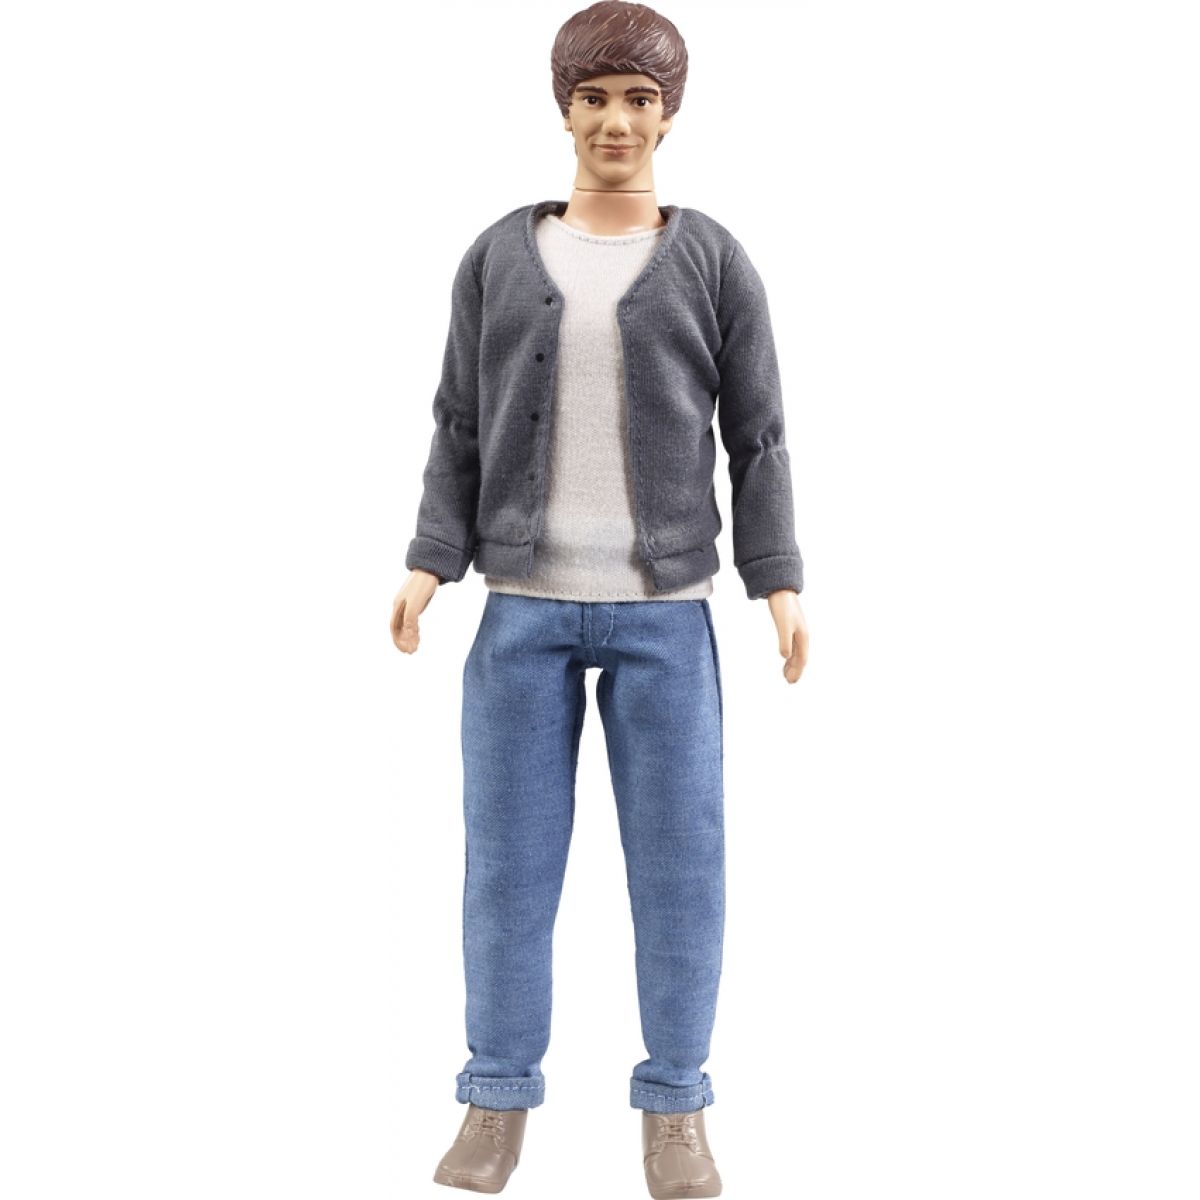 One Direction figurky - Liam